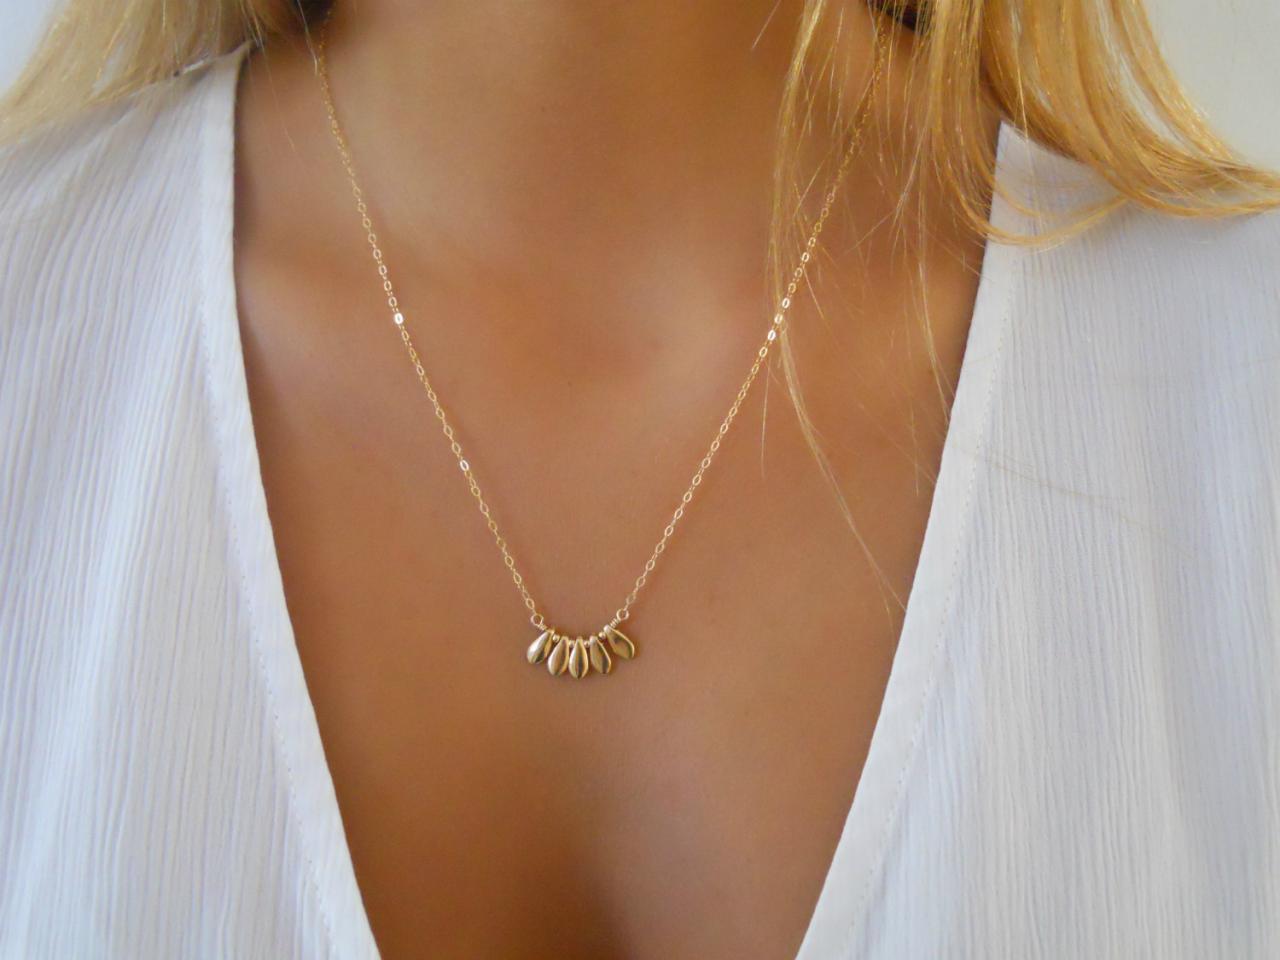 Delicate Gold Boho Necklace, Layering Gold Necklace, Beads Pendant Necklace, Layered Gold Necklace, Crescent Pendant Necklace, Gift For Her